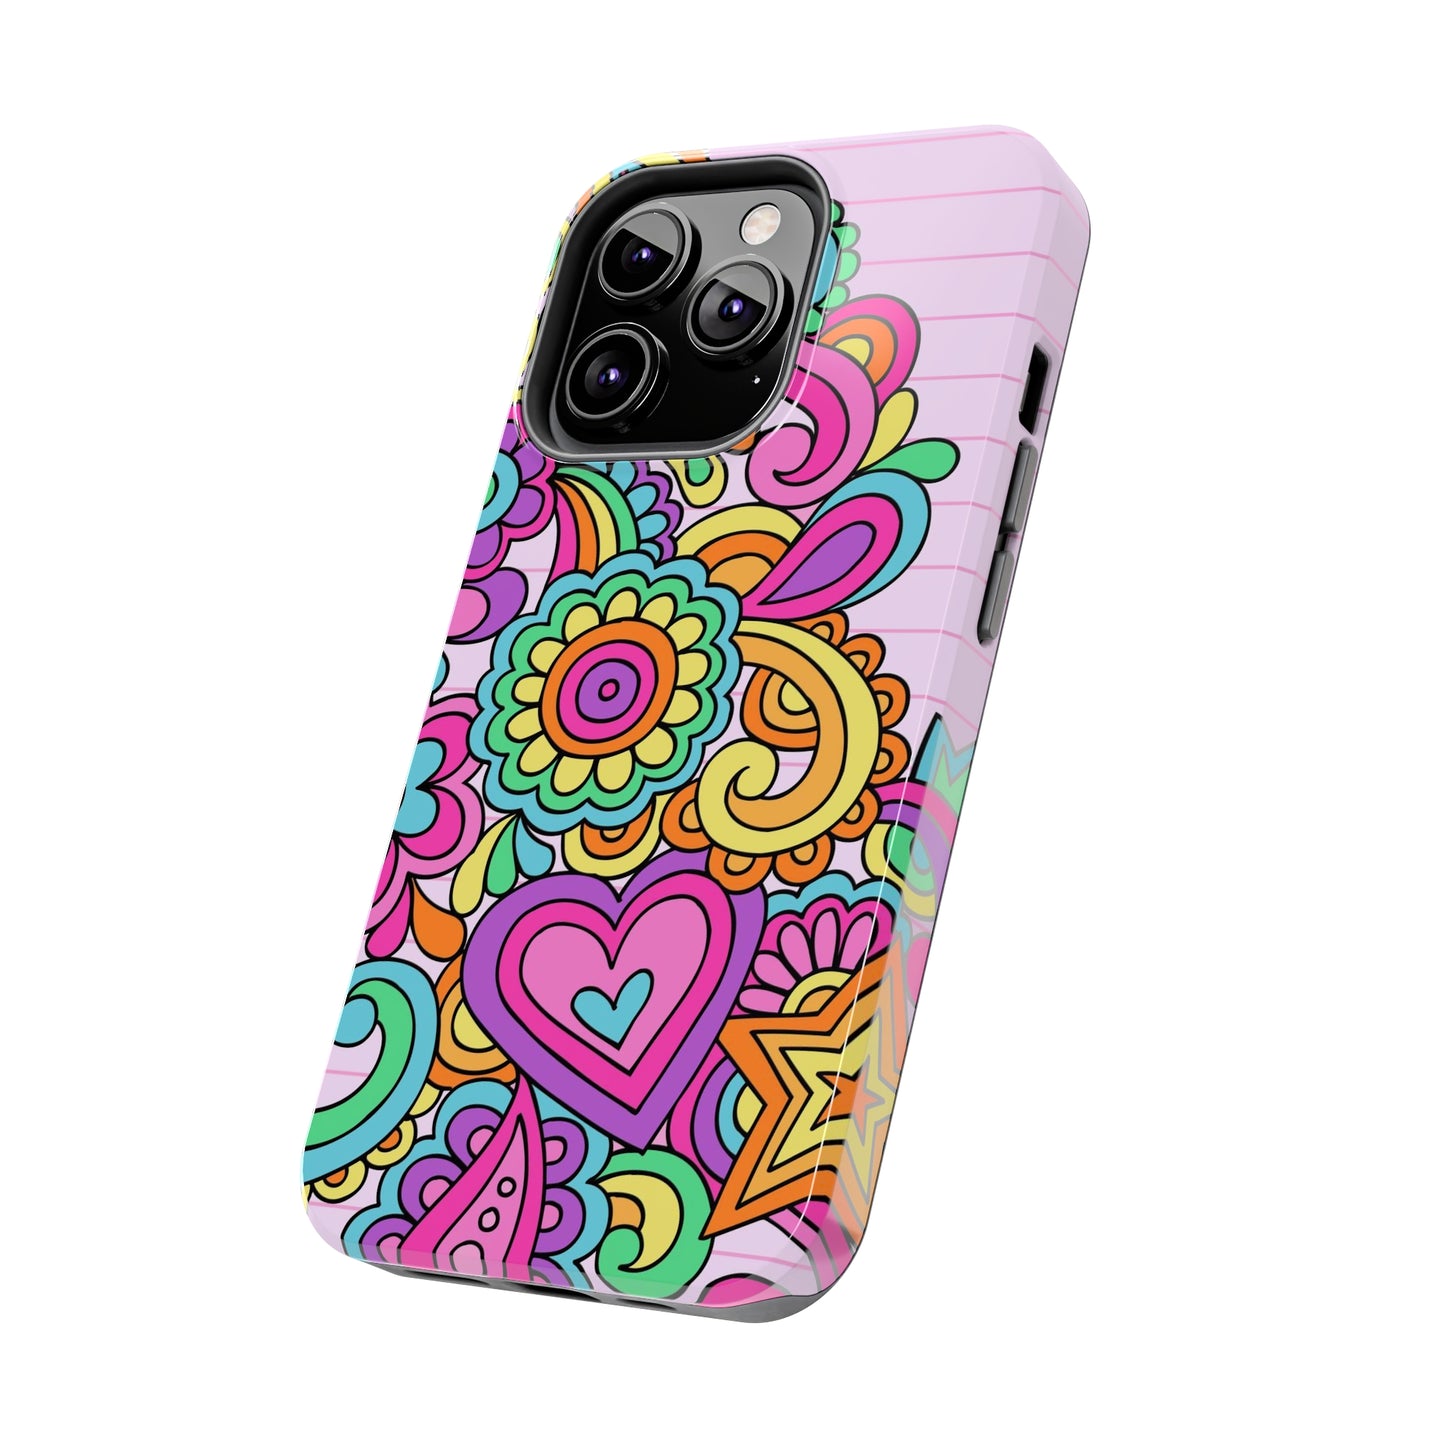 Flower Child Only / iPhone Case